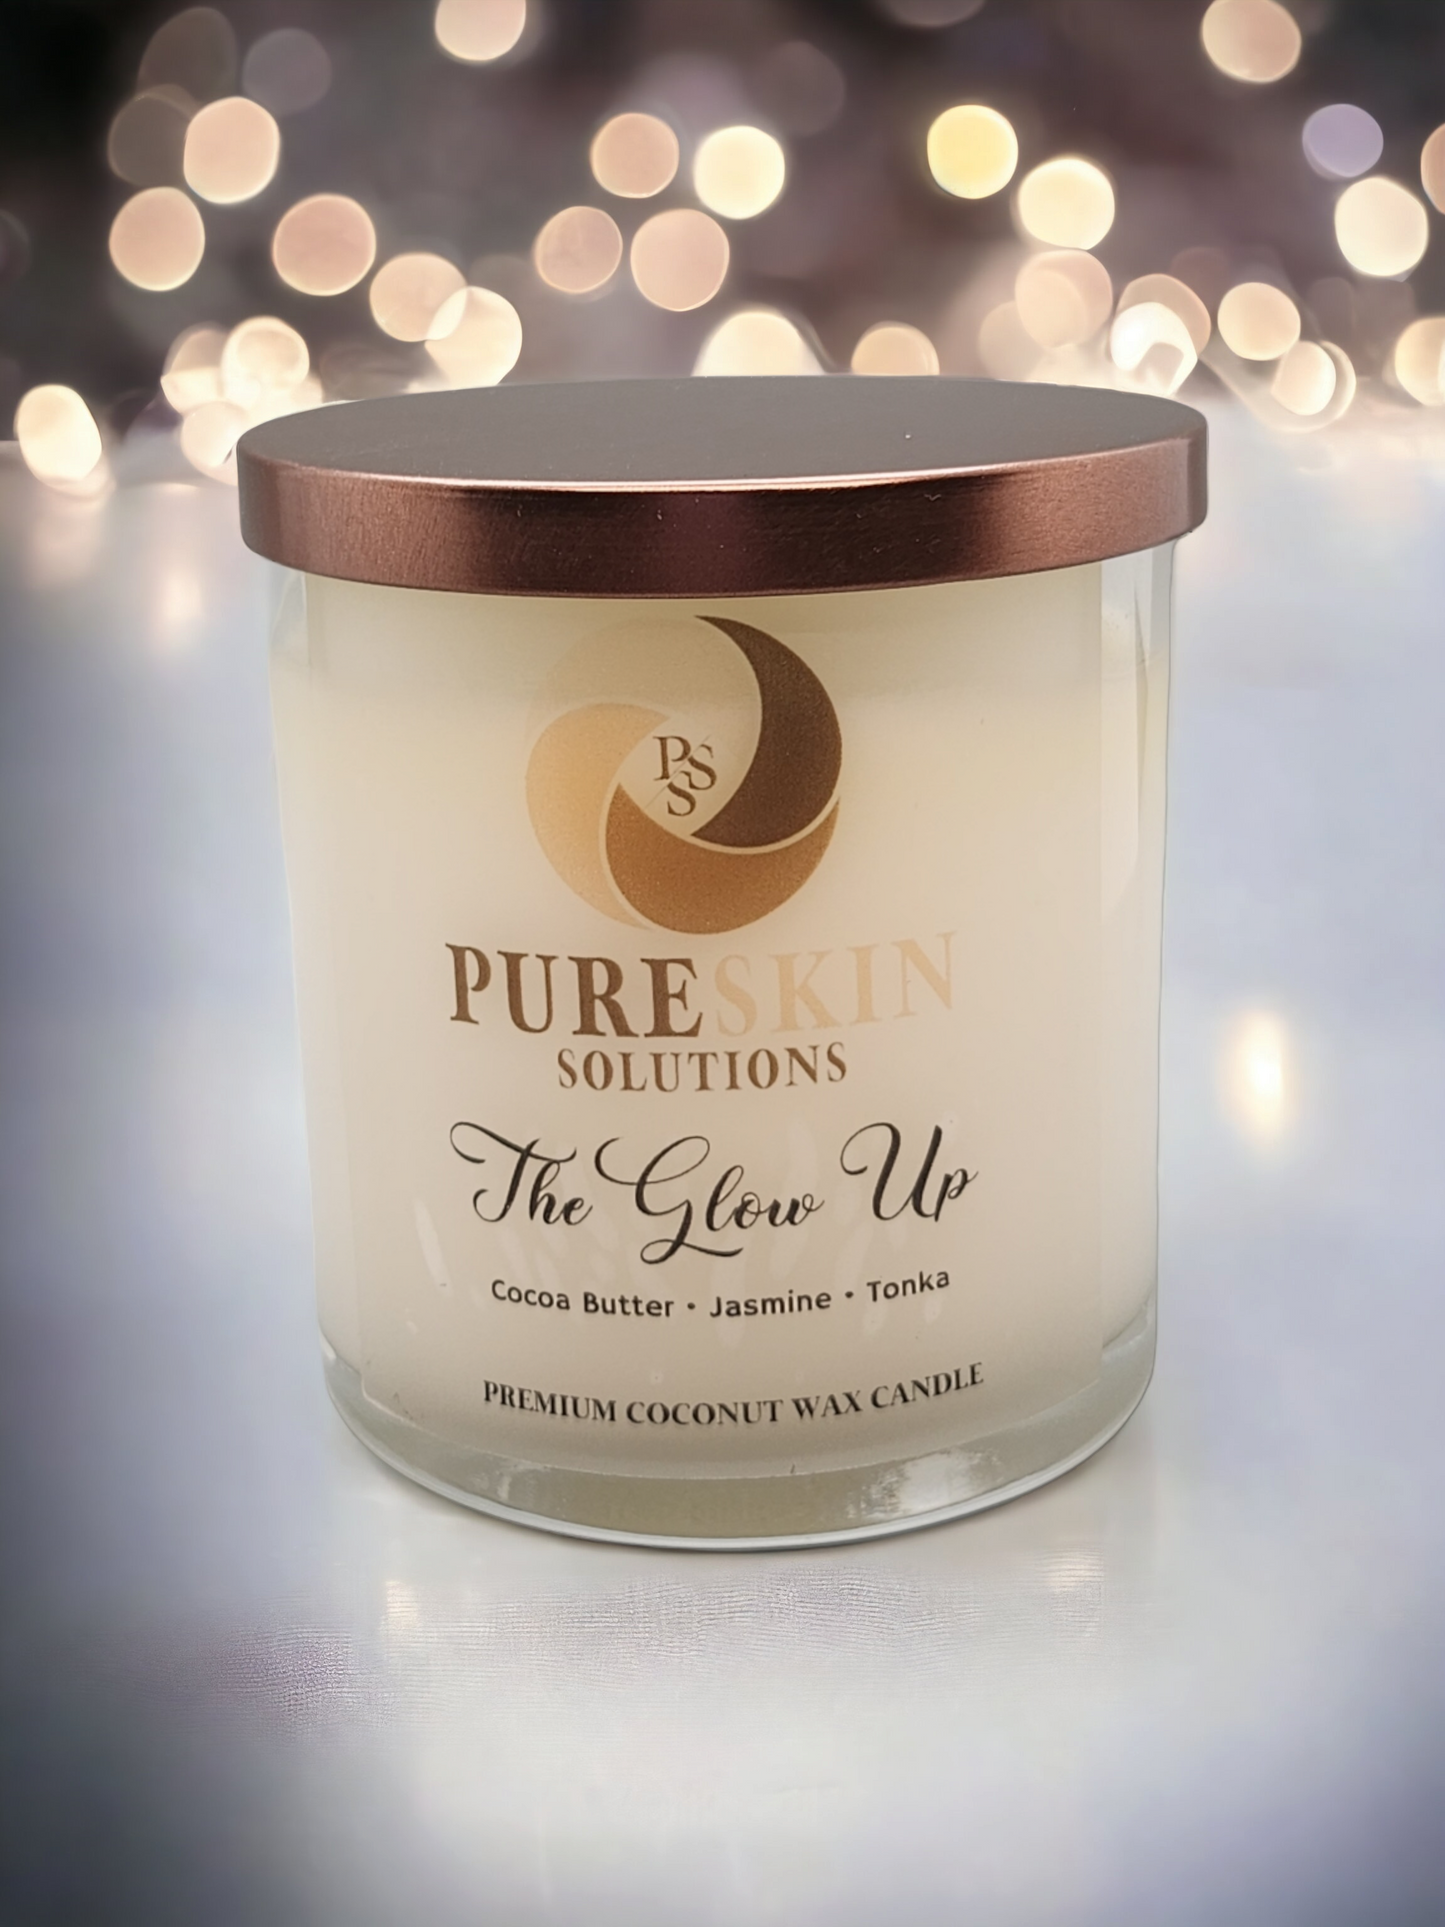 The Glow Up Premium Coconut Wax Candle